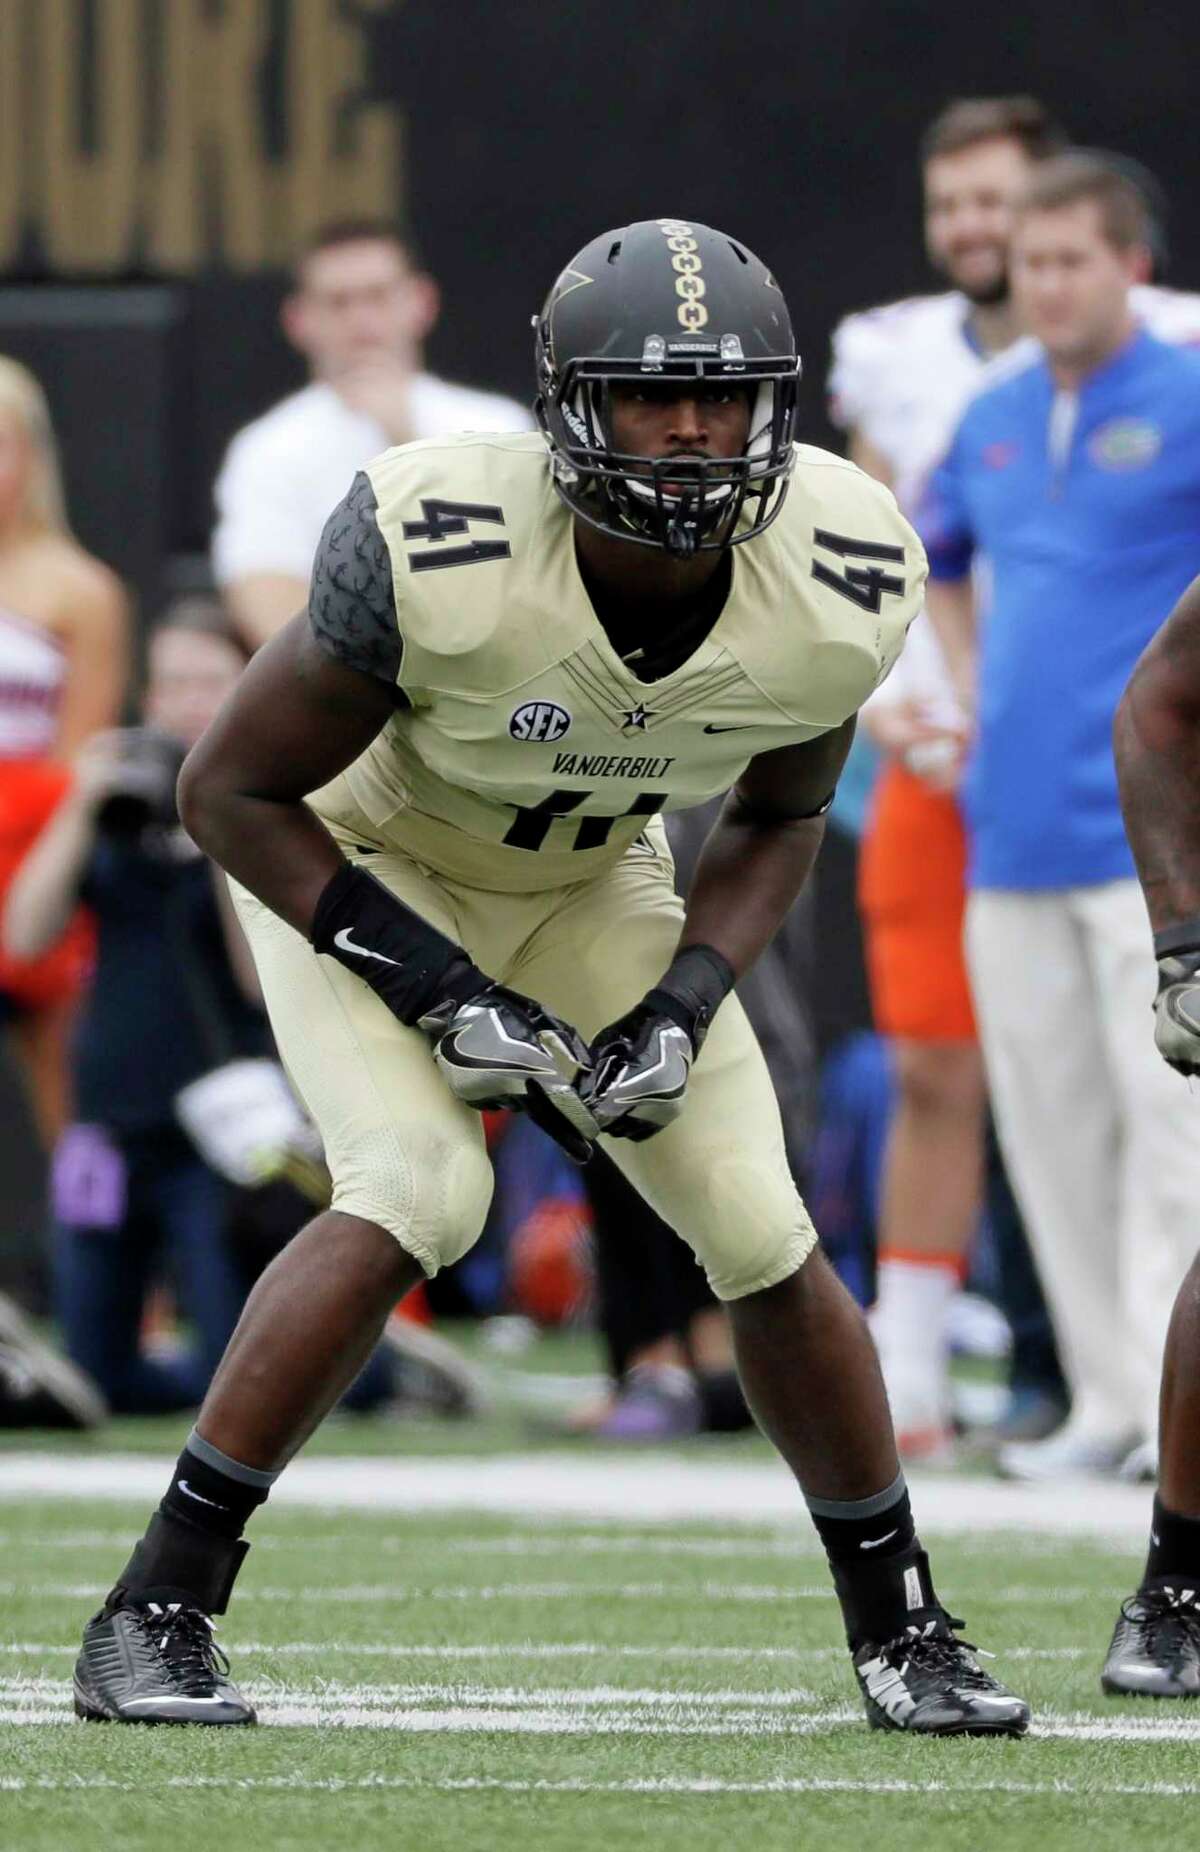 FILE - In this Oct. 1, 2016, file photo, Vanderbilt linebacker Zach Cunningham plays against Florida during an NCAA college football game in Nashville, Tenn. Cunningham has been among the nationÂ?’s most productive defensive players and earned first-team AP All-America honors after making 119 tackles, including 16Â½ for a loss. Vanderbilt plays North Carolina State in the Independence Bowl on Monday. (AP Photo/Mark Humphrey, File)